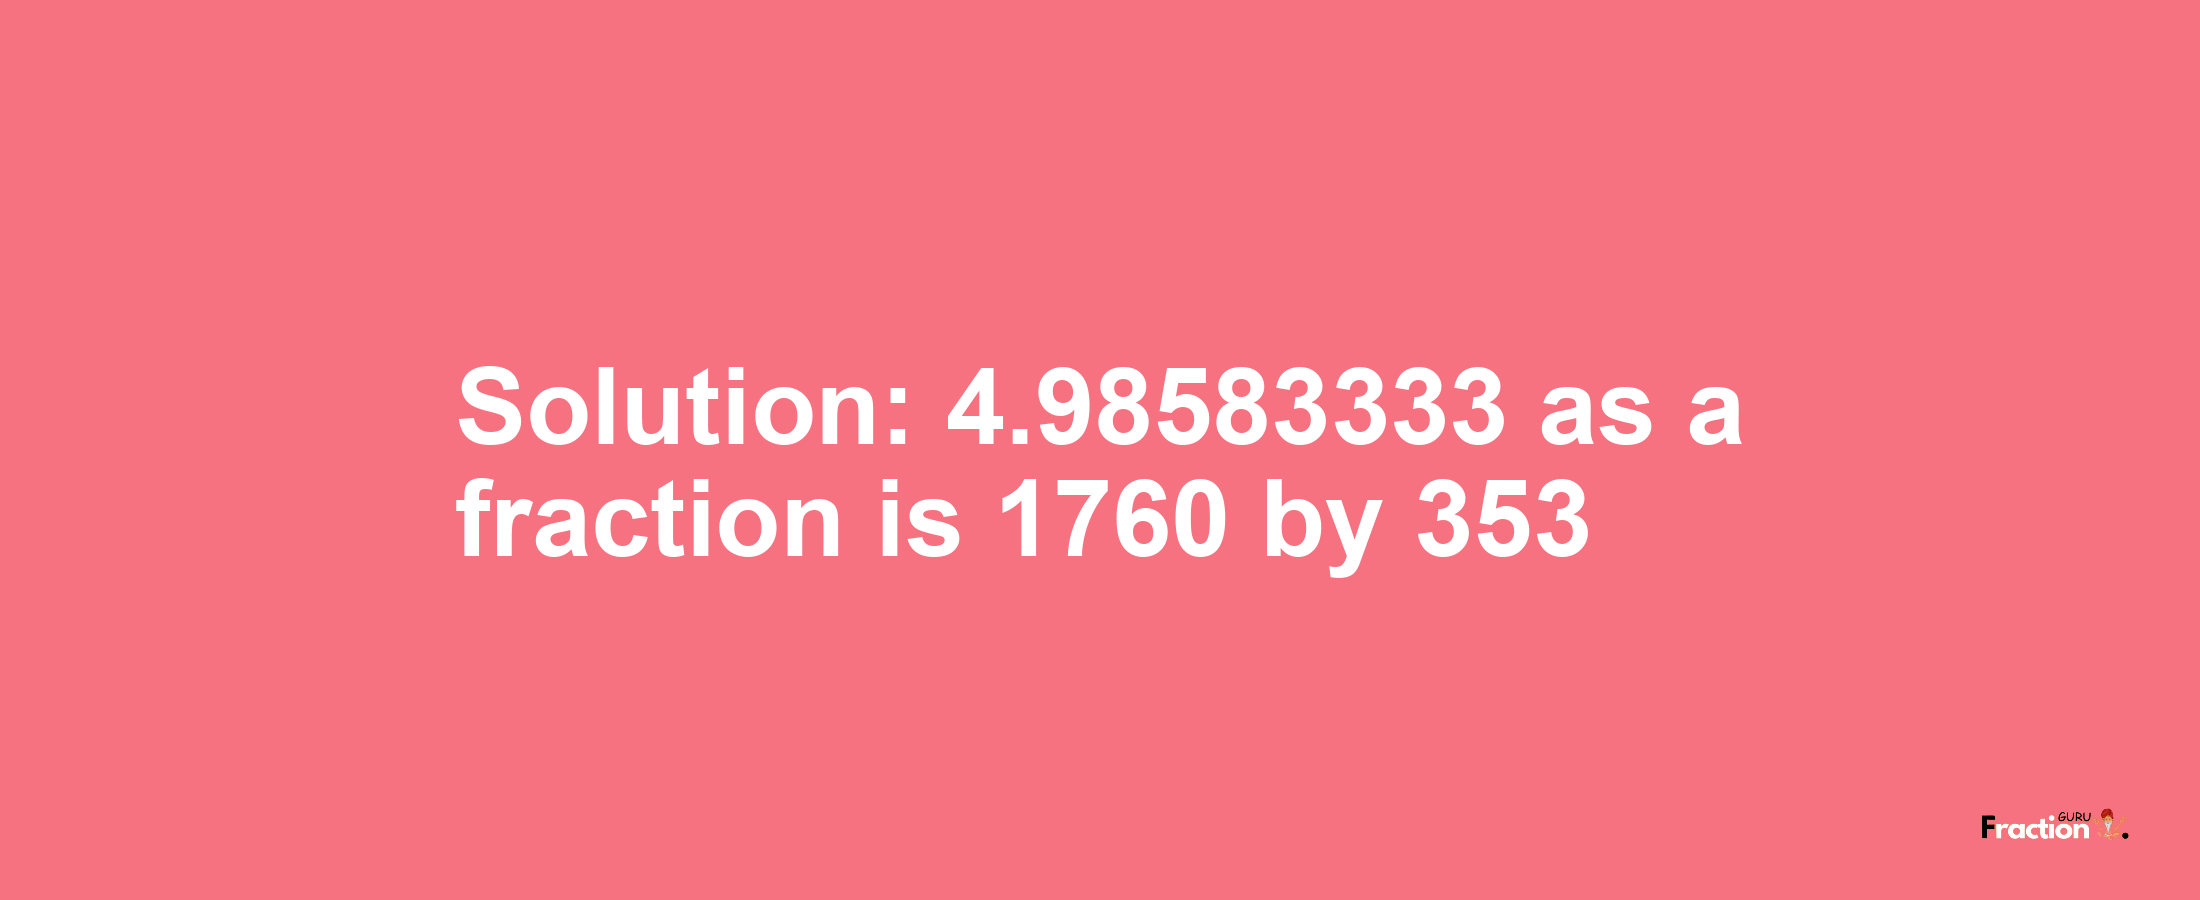 Solution:4.98583333 as a fraction is 1760/353